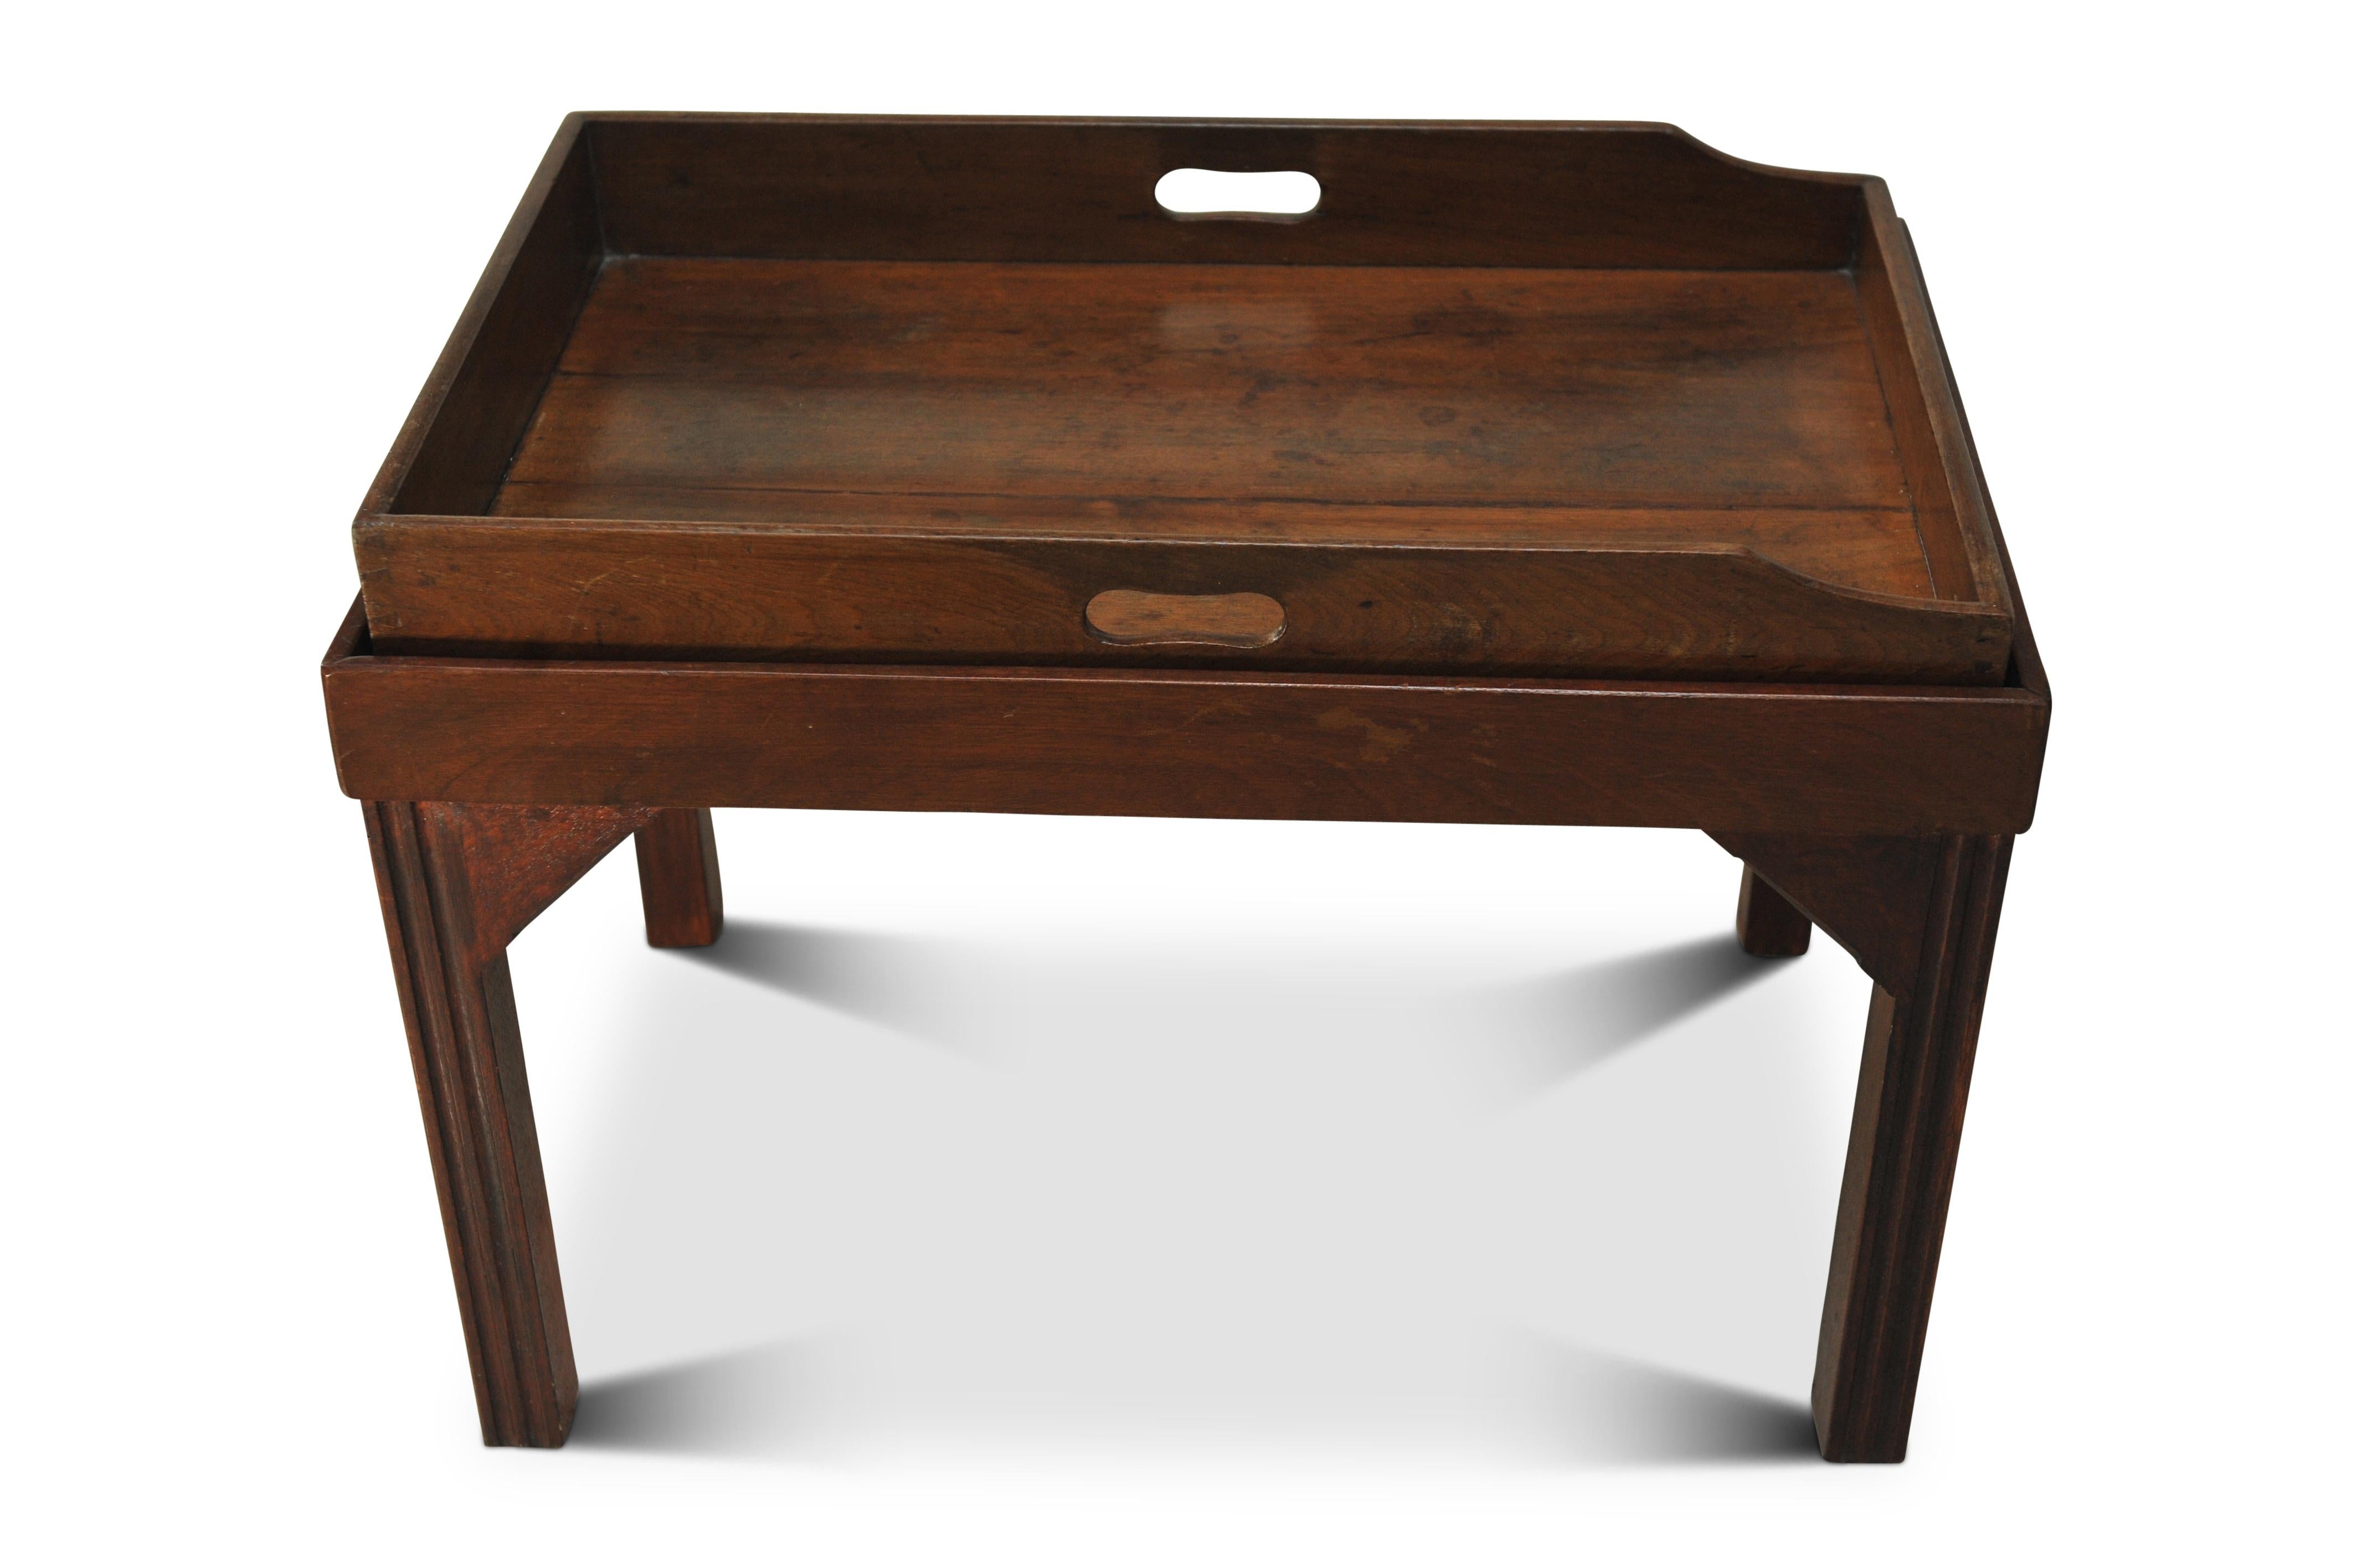 British A Victorian Mahogany Butler's Tray With A Later Fixed Coffee Table Stand  For Sale